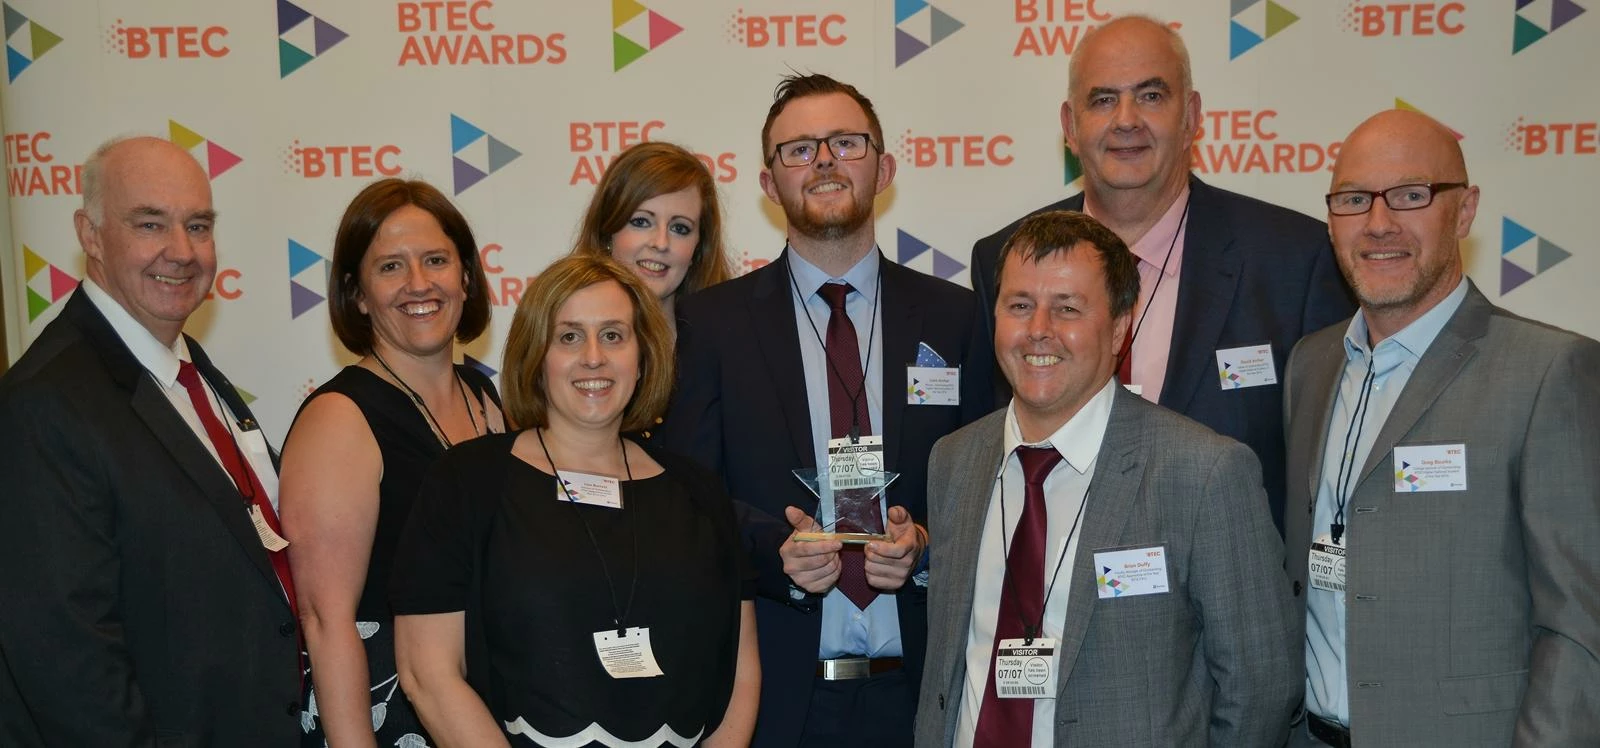 Leeds students engineer success at awards ceremony 